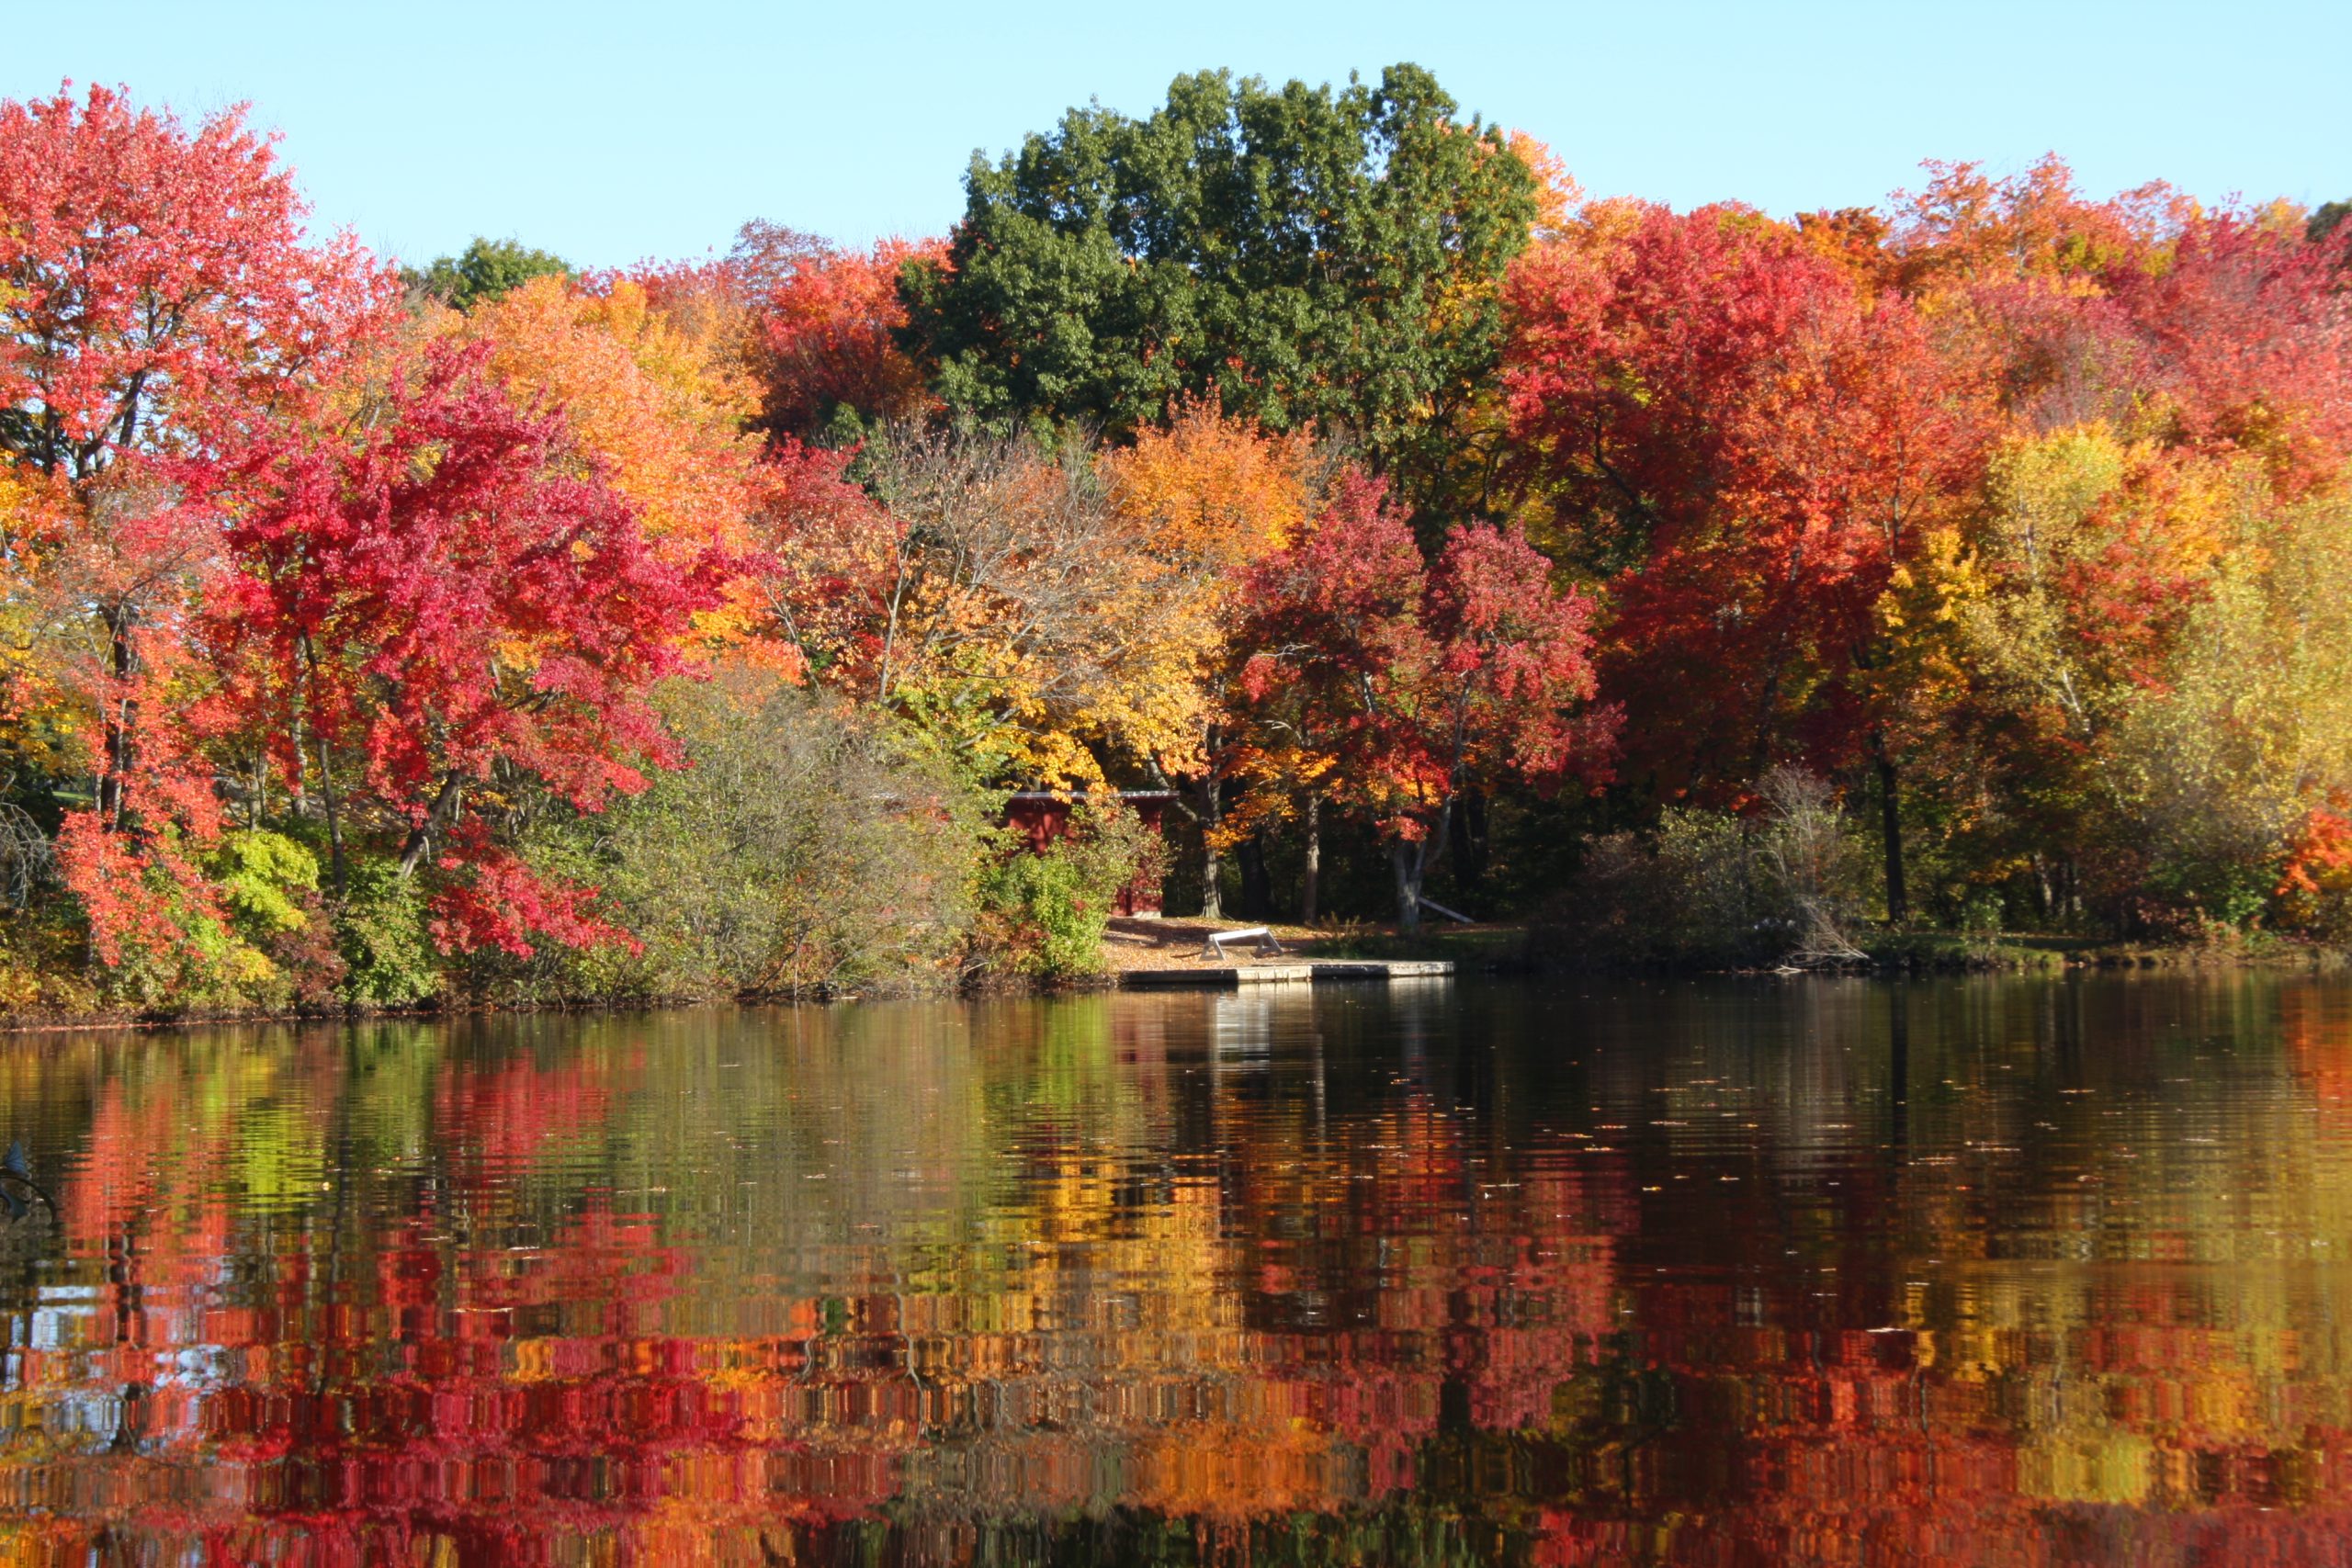 Mhc Canoe Dock In Autumn (user submitted)